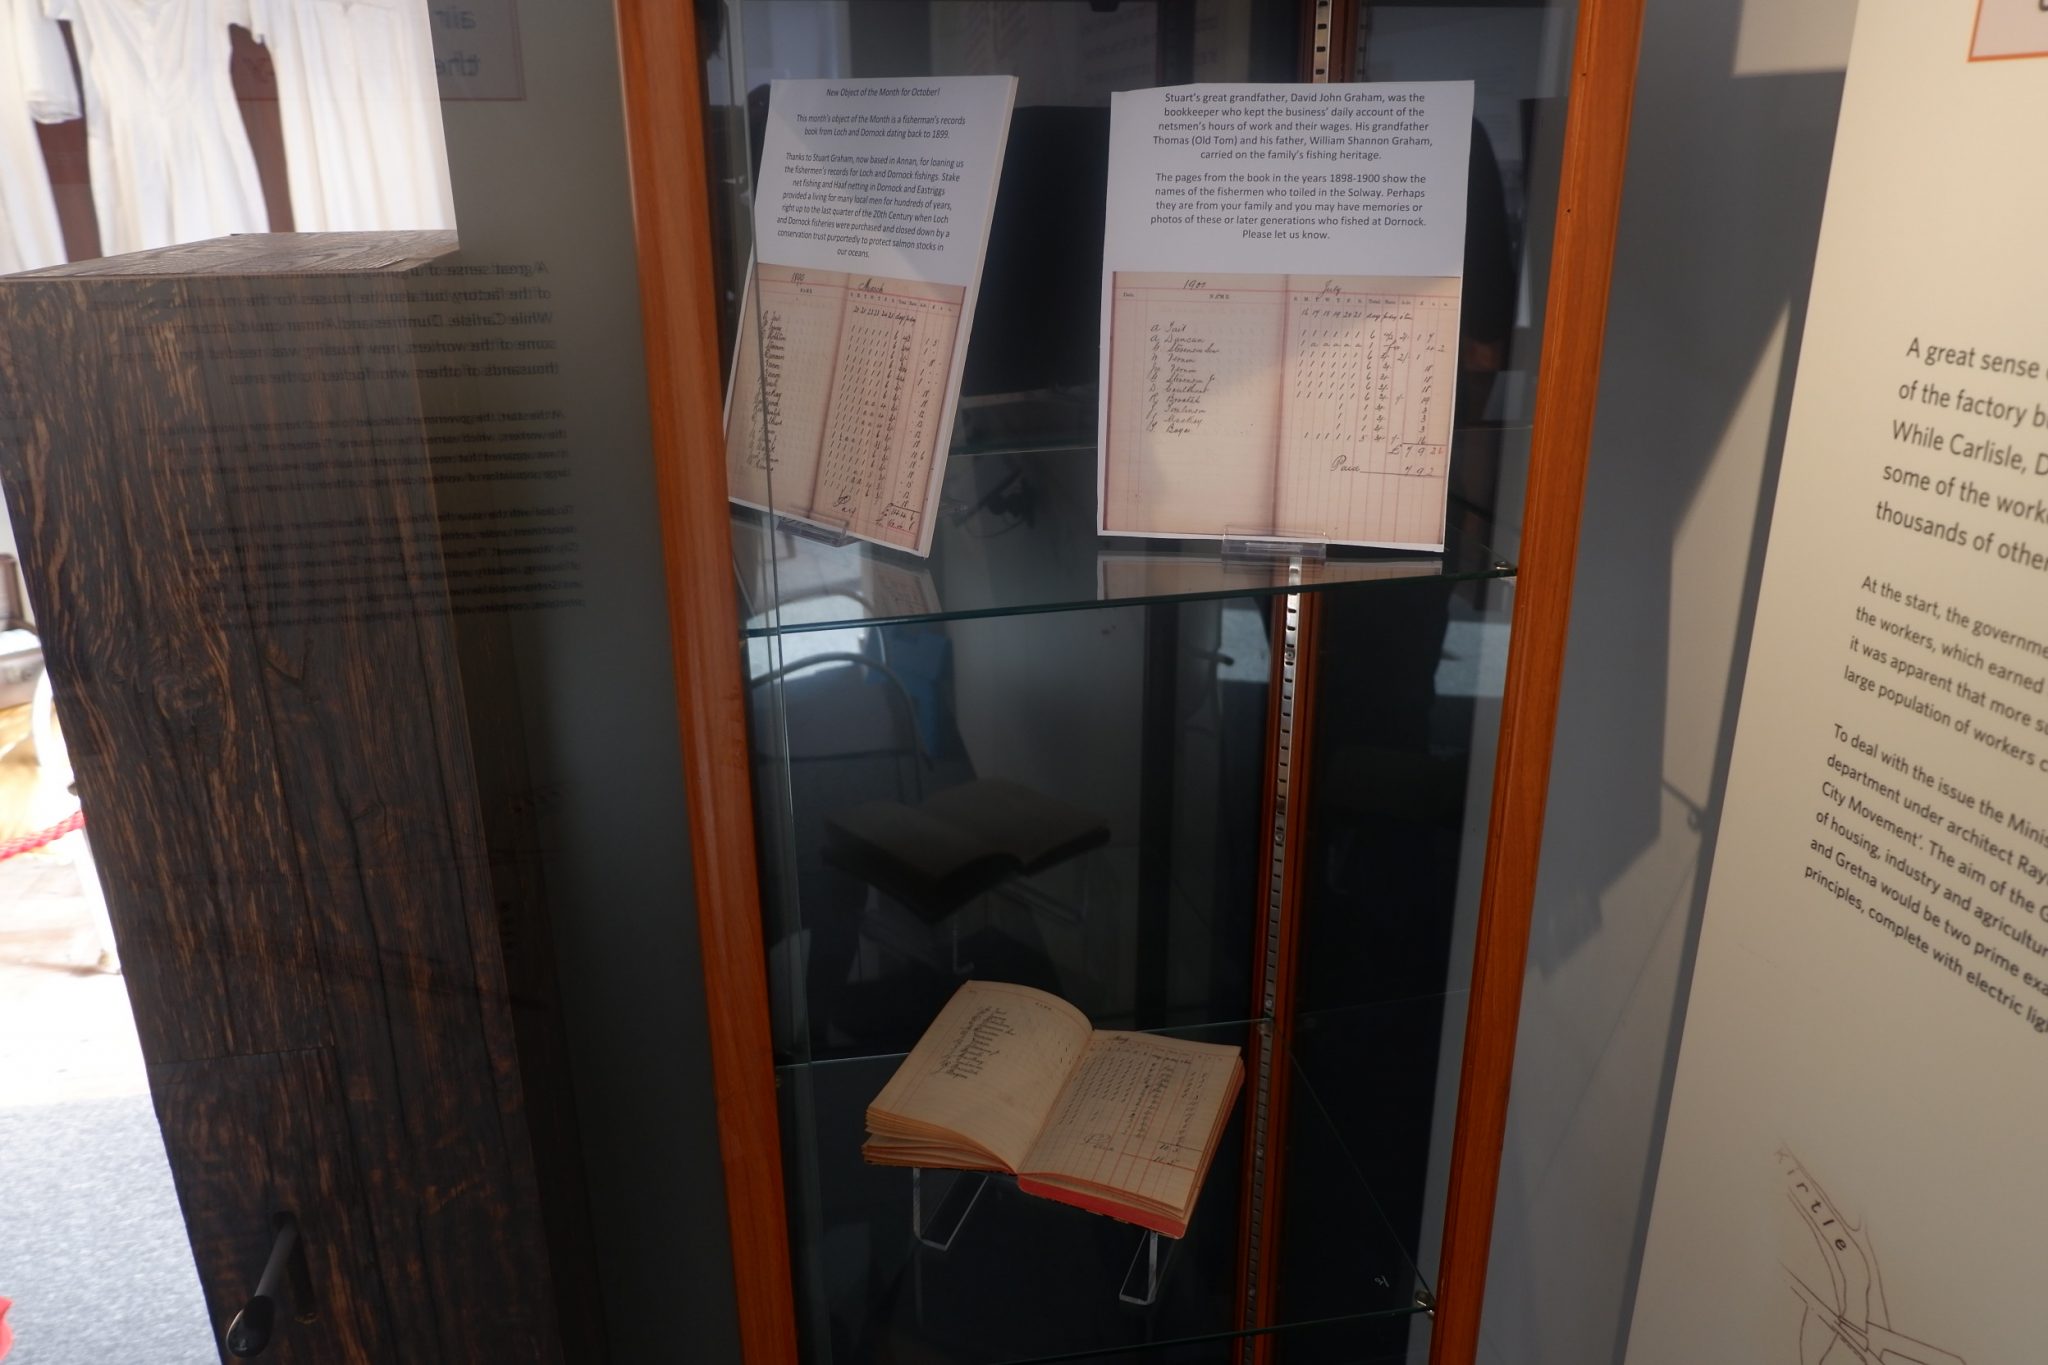 A book and some information panels featuring it's pages on display in The Devil's Porridge Museum.